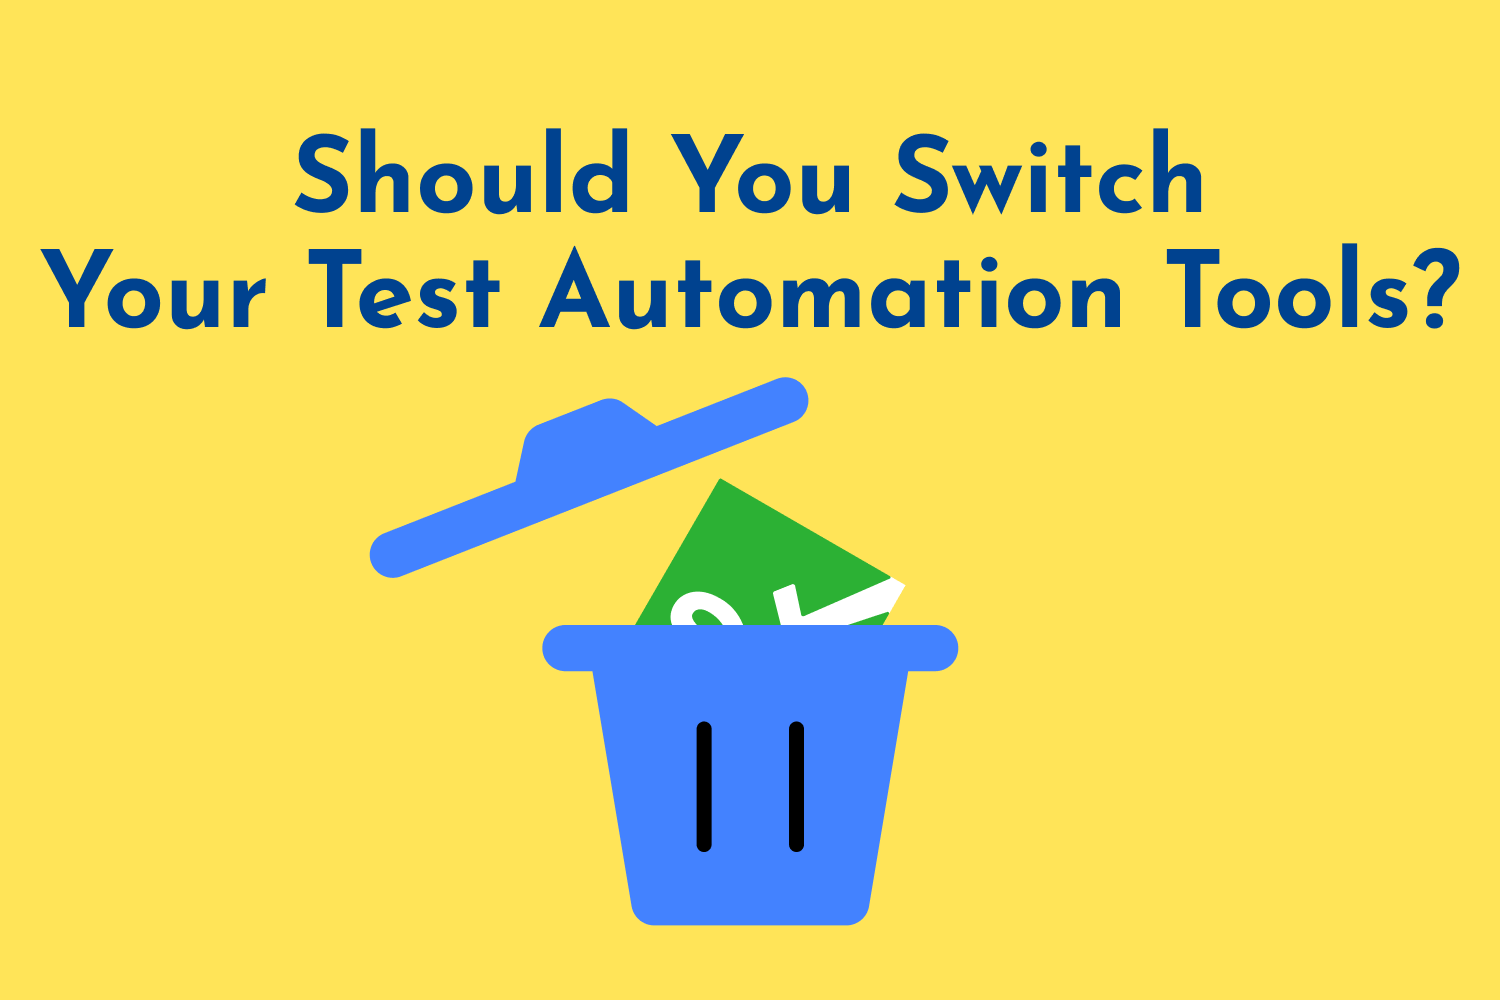 Should You Switch Your Test Automation Tools?